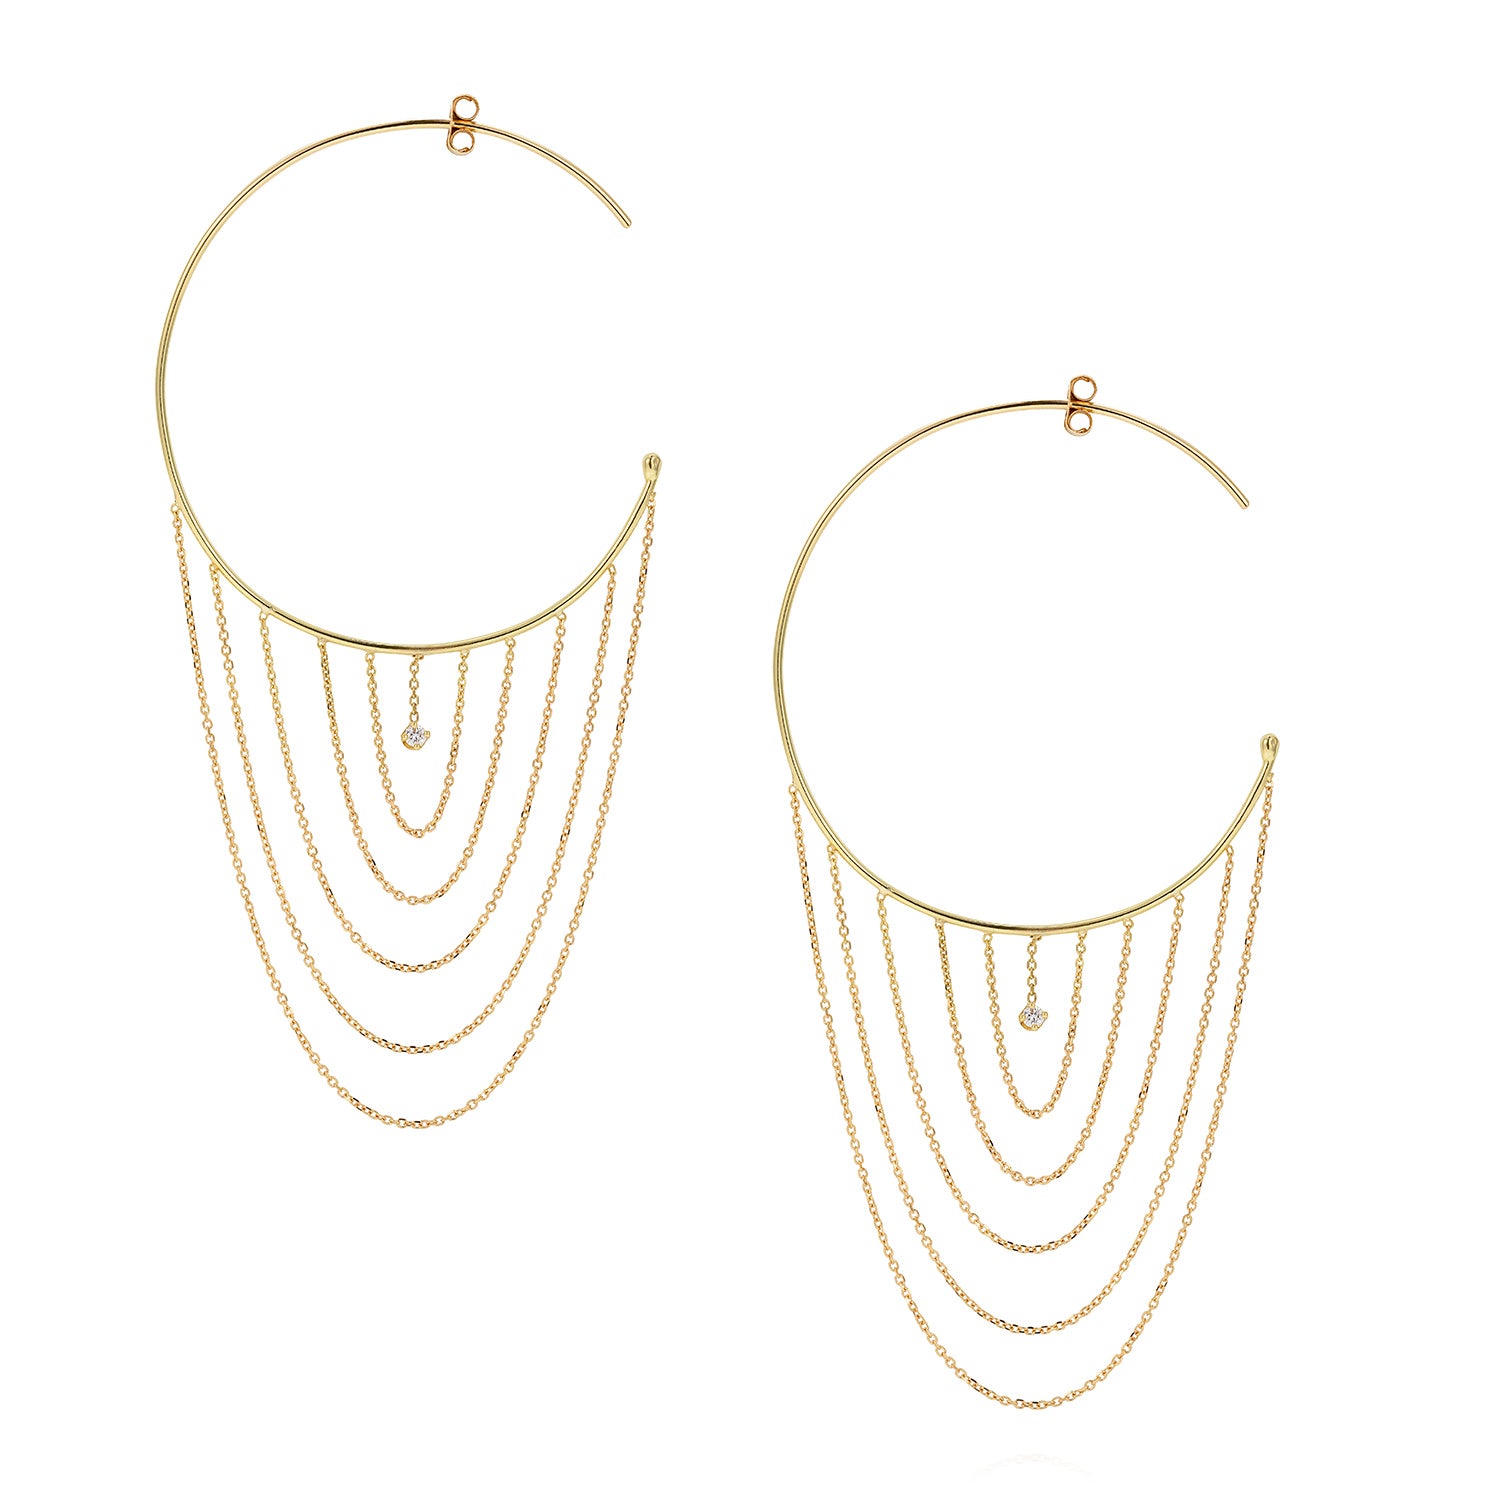 Sweet Pea 18ct gold large hoop Nouveau Now hoops with white diamond and hanging chains. 